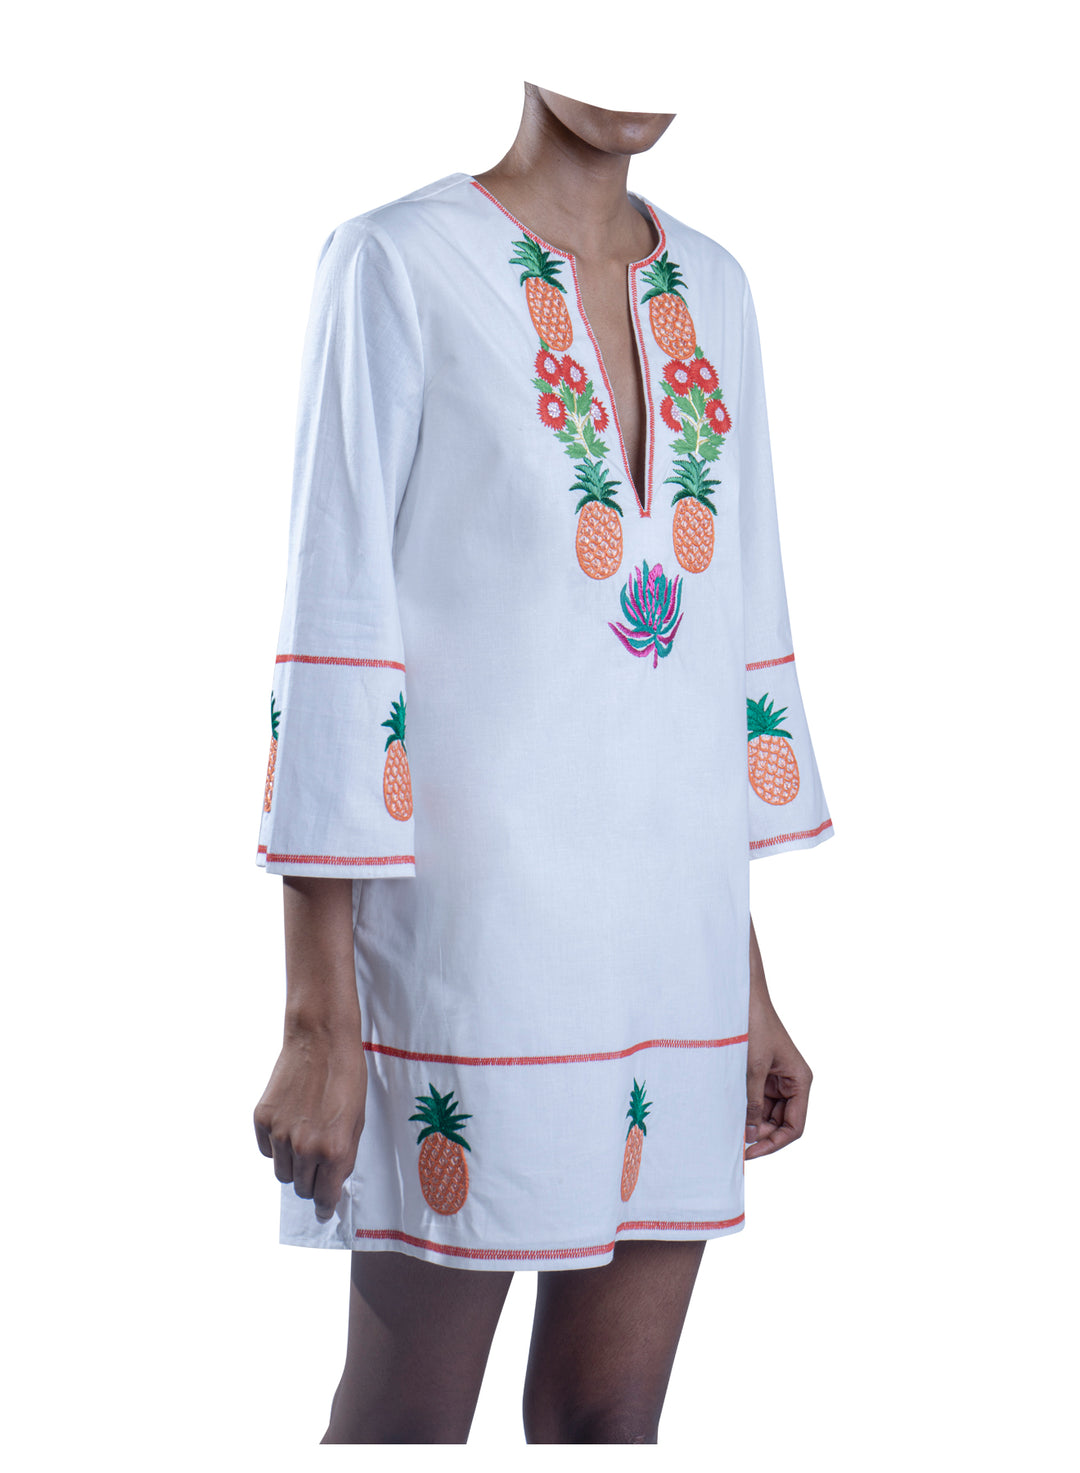 Embroidered Pineapple Tunic